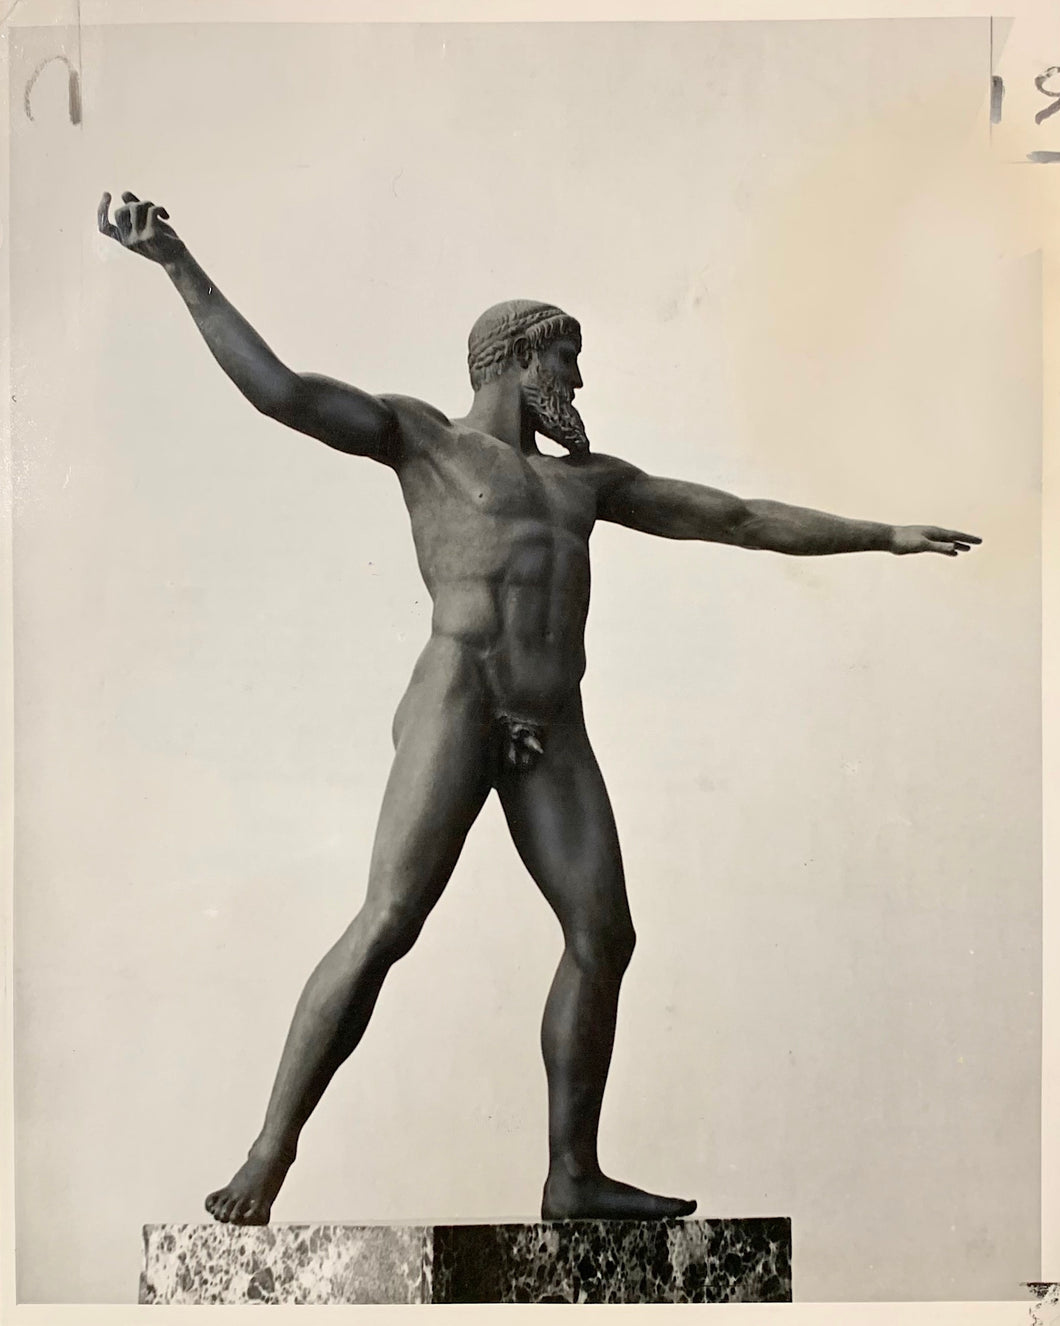 'Statue of Poseidon at the United Nations General Assembly building' - original vintage press photograph